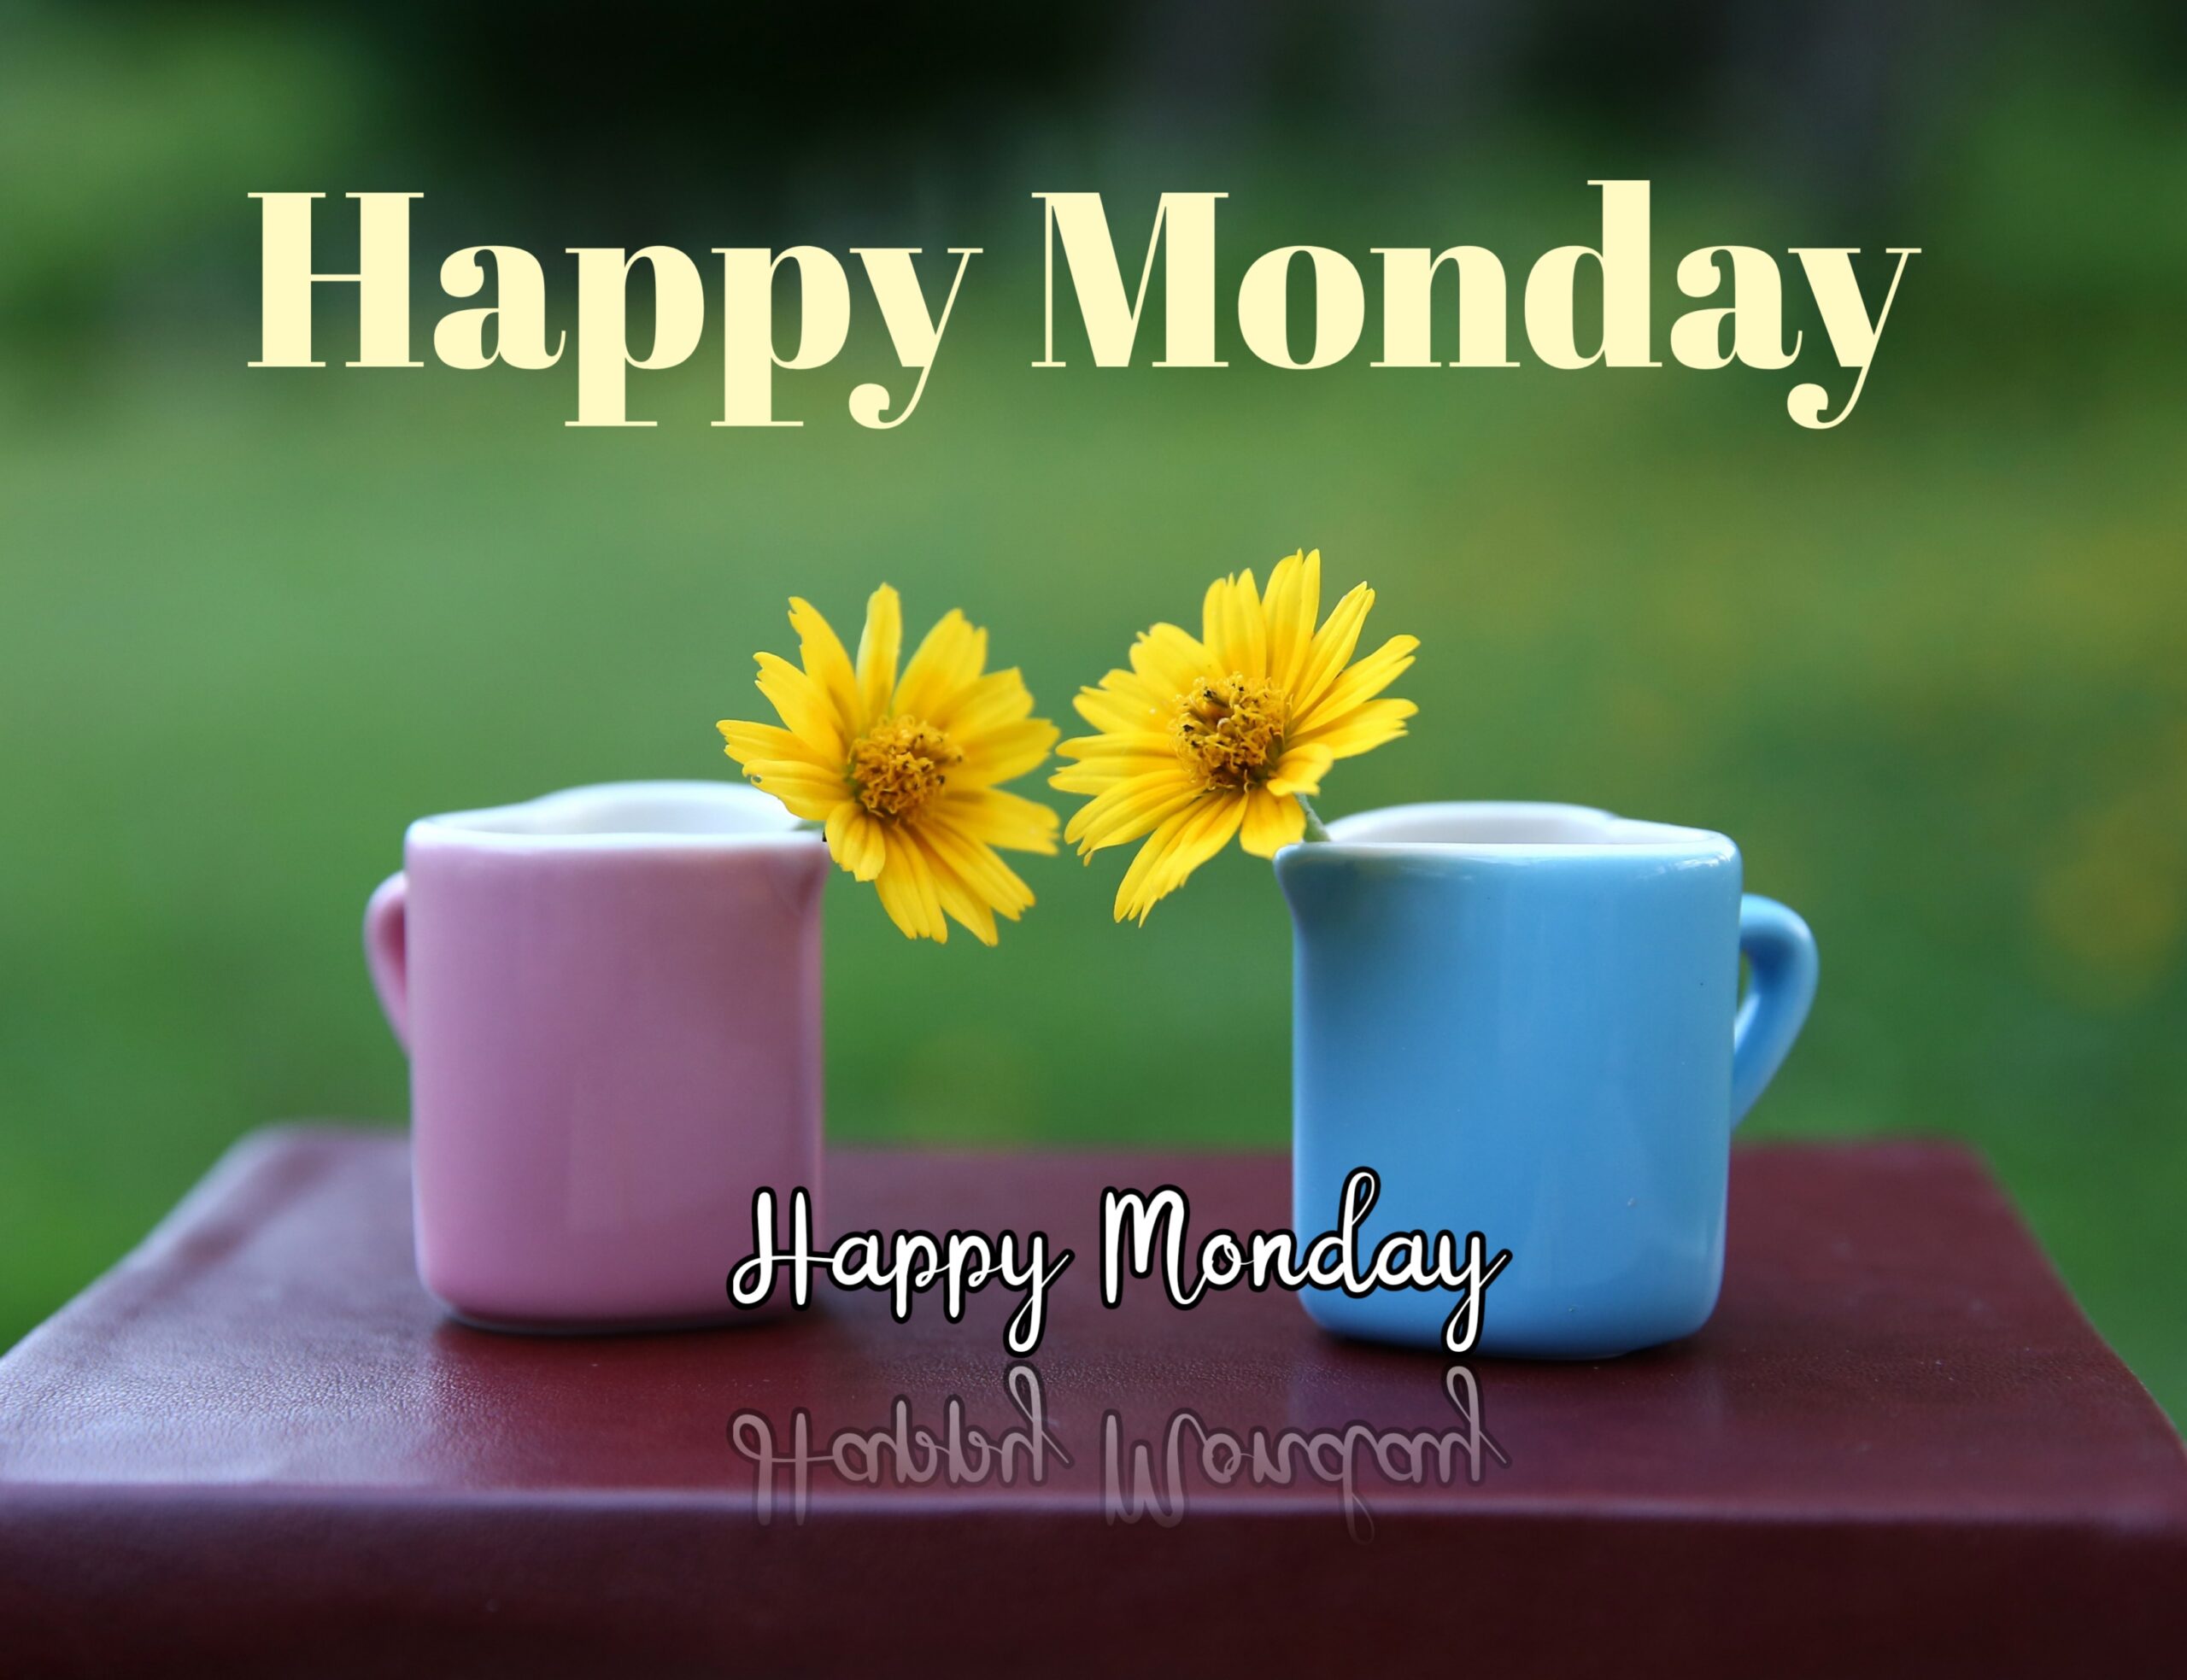 Good Morning Monday Images for Whatsapp Free Download